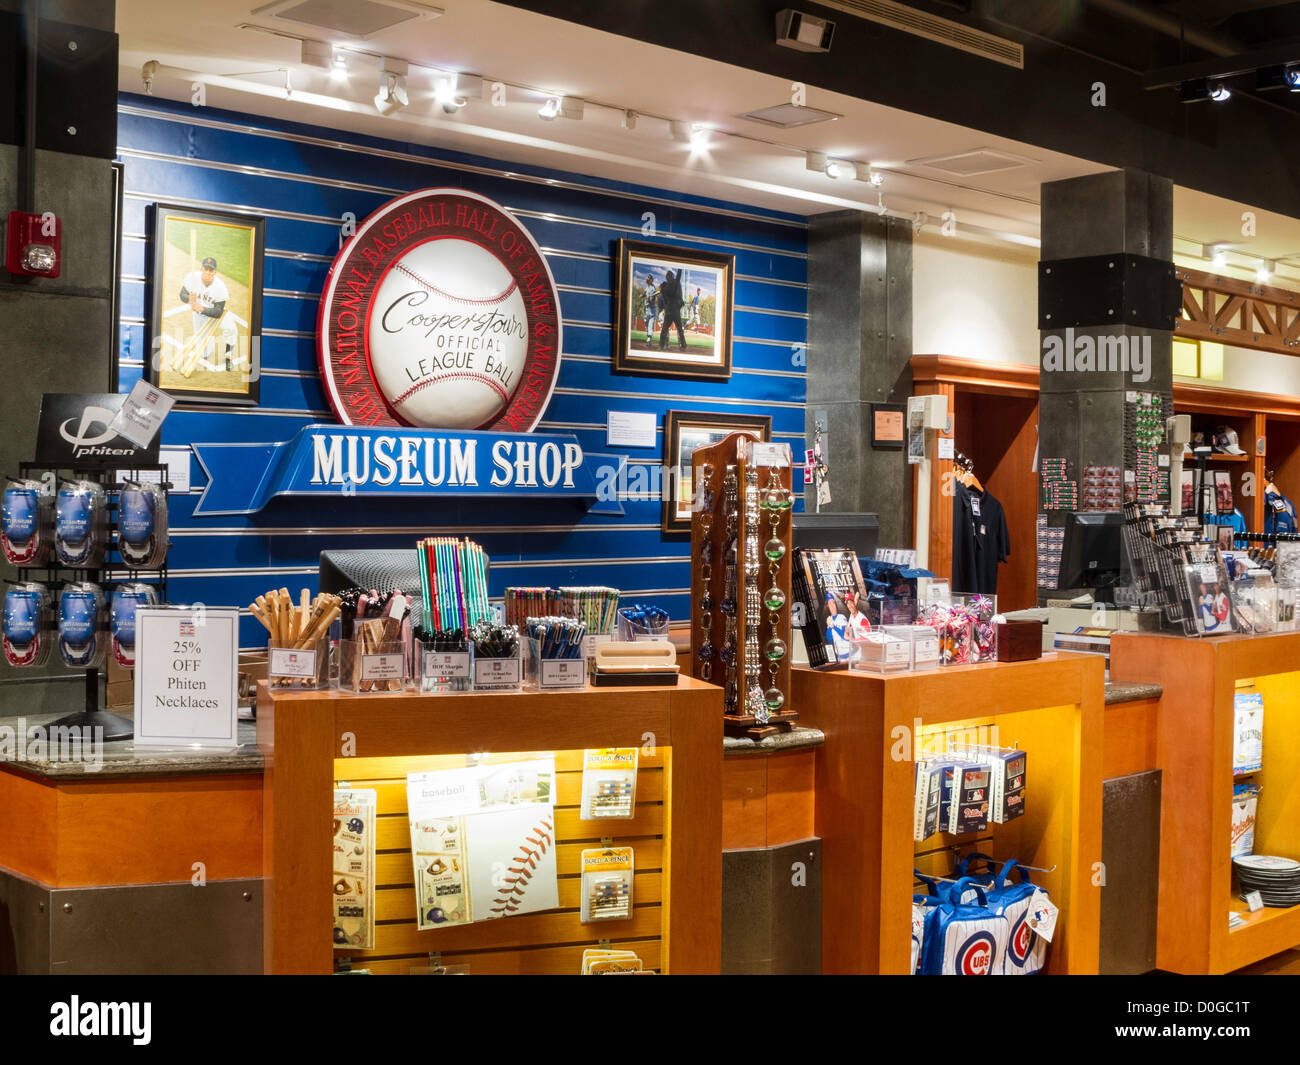 Museum Shop National Baseball Hall Of Fame Cooperstown Ny D0GC1T 